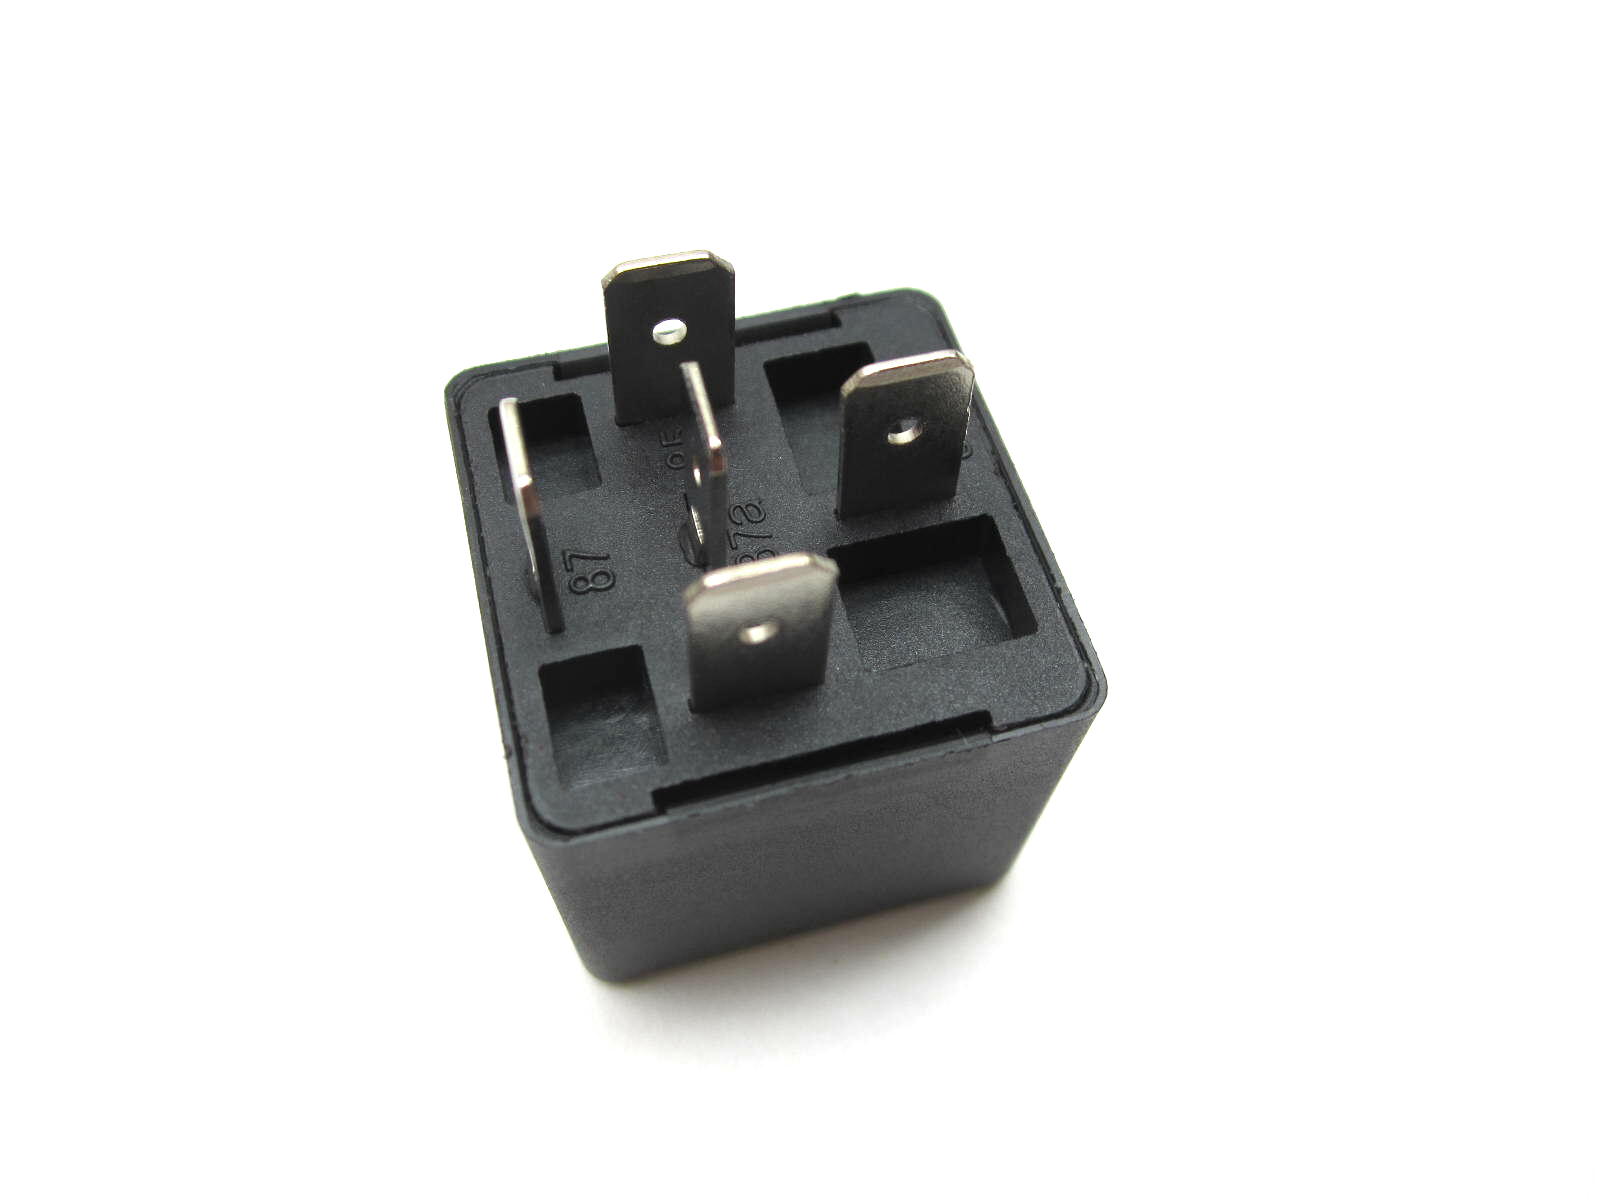 Starter relay 5 pin 12V40A cube LM4/5 Cal3 Mille 1000S SP3